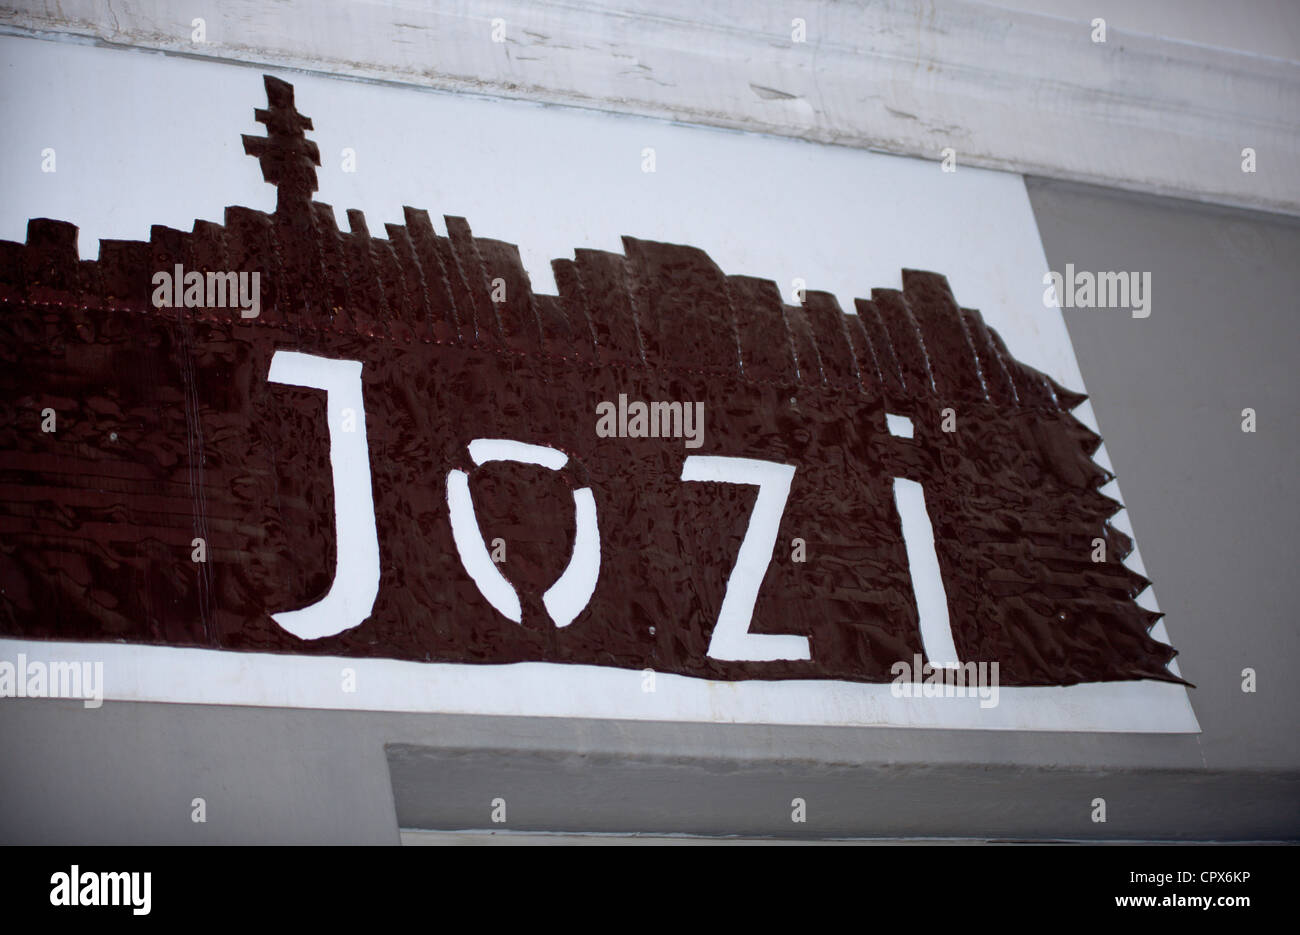 The word 'Jozi' cut out of brown fabrics on a white surface Stock Photo